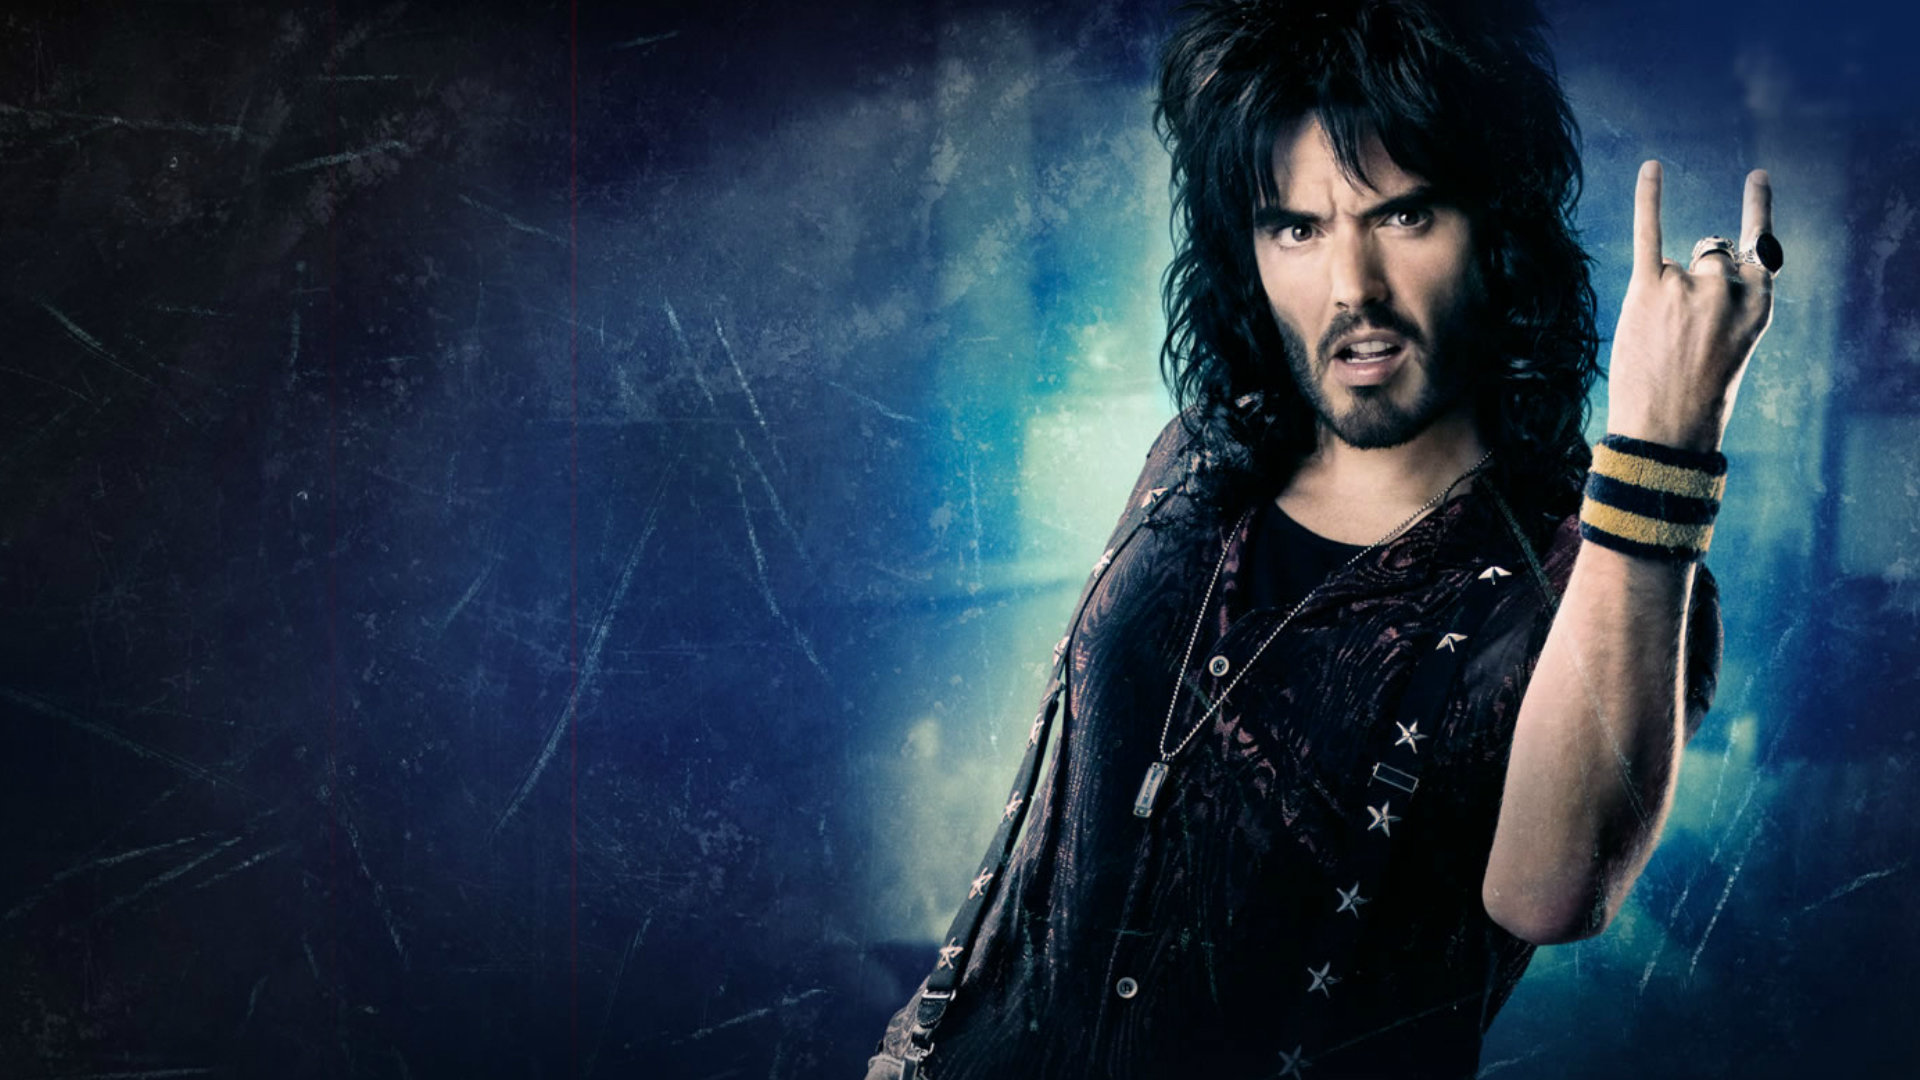 Download full hd 1920x1080 Rock Of Ages PC background ID:452441 for free